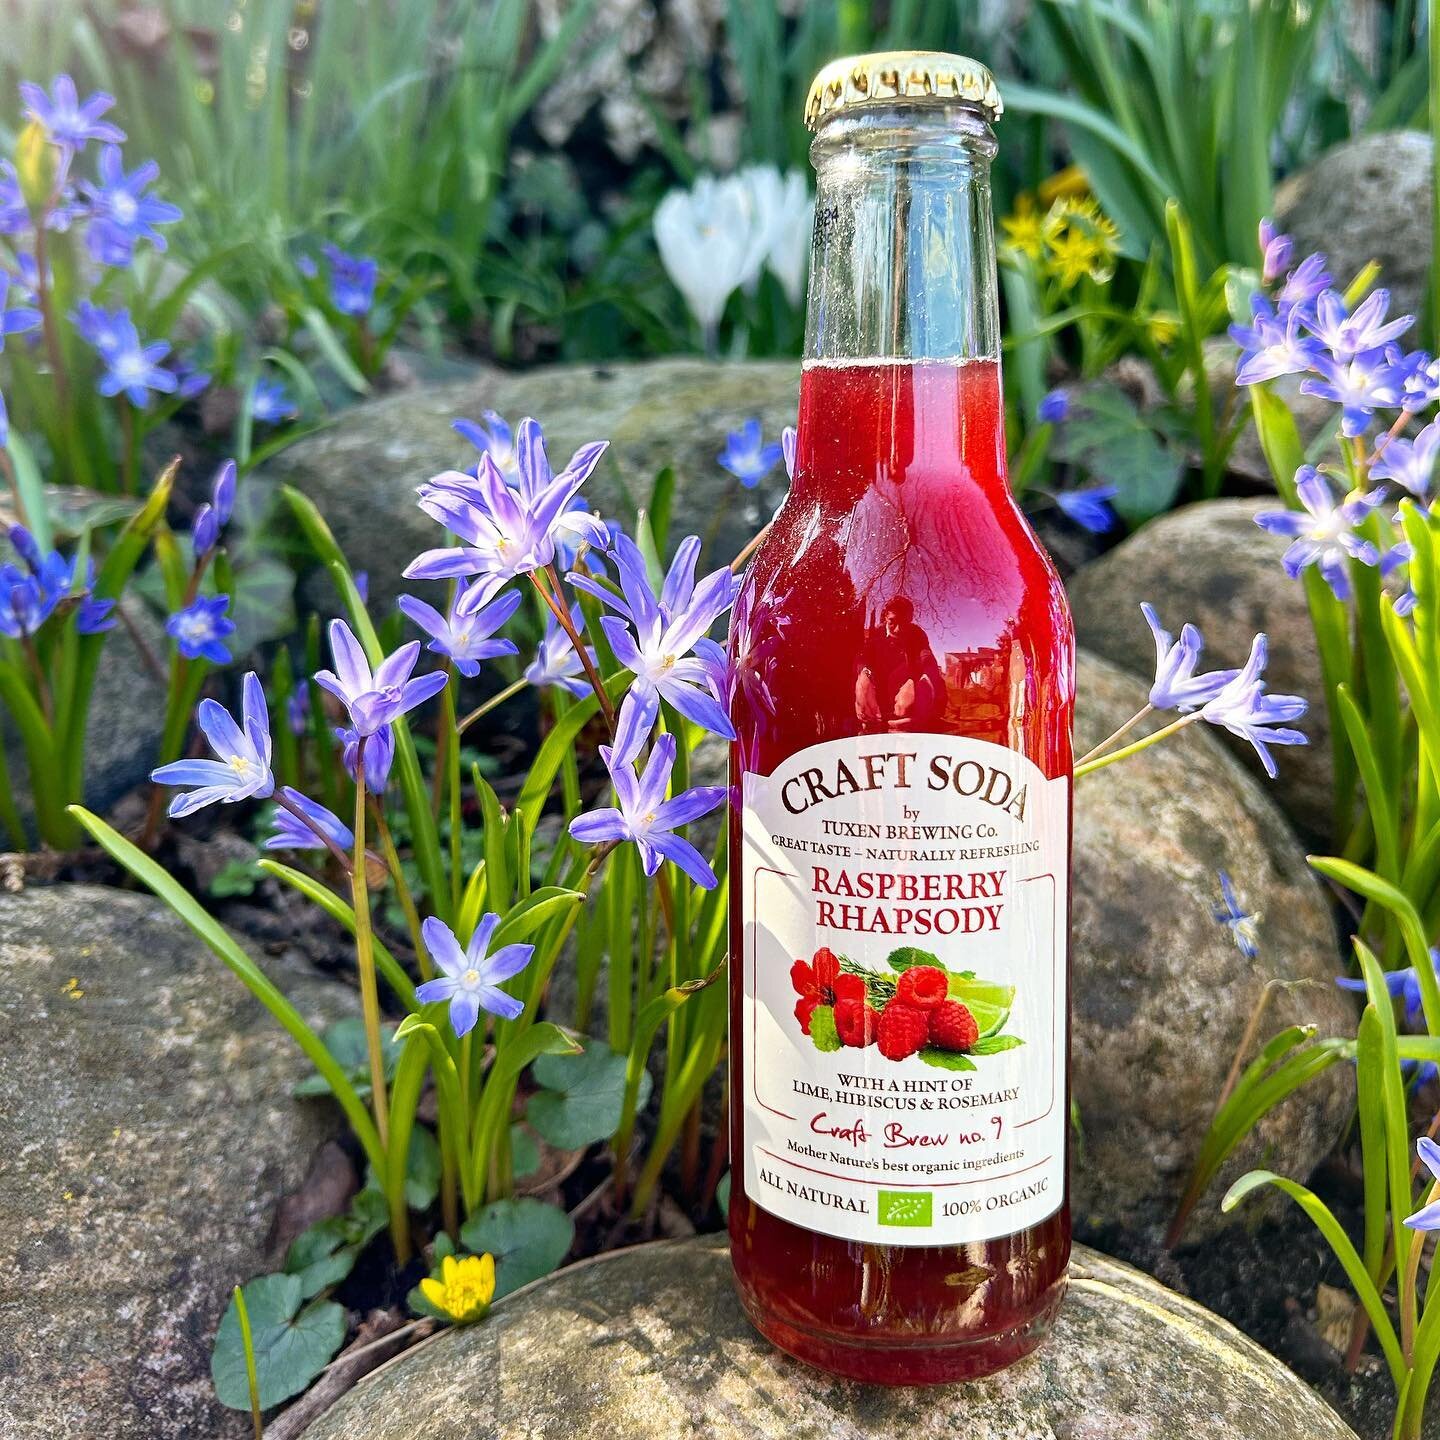 RASPBERRY RHAPSODY &hellip; &lsquo;Craft Brew no. 9&rsquo; loaded with organic rasperries, lime, mint, rosemary and a hint of hibiscus 🌿🌺 100% organic and truly tasty &hellip; Cheers! 💚😋 www.craftsoda.dk @craft.soda #gourmetsoda #nonalcoholicdrin